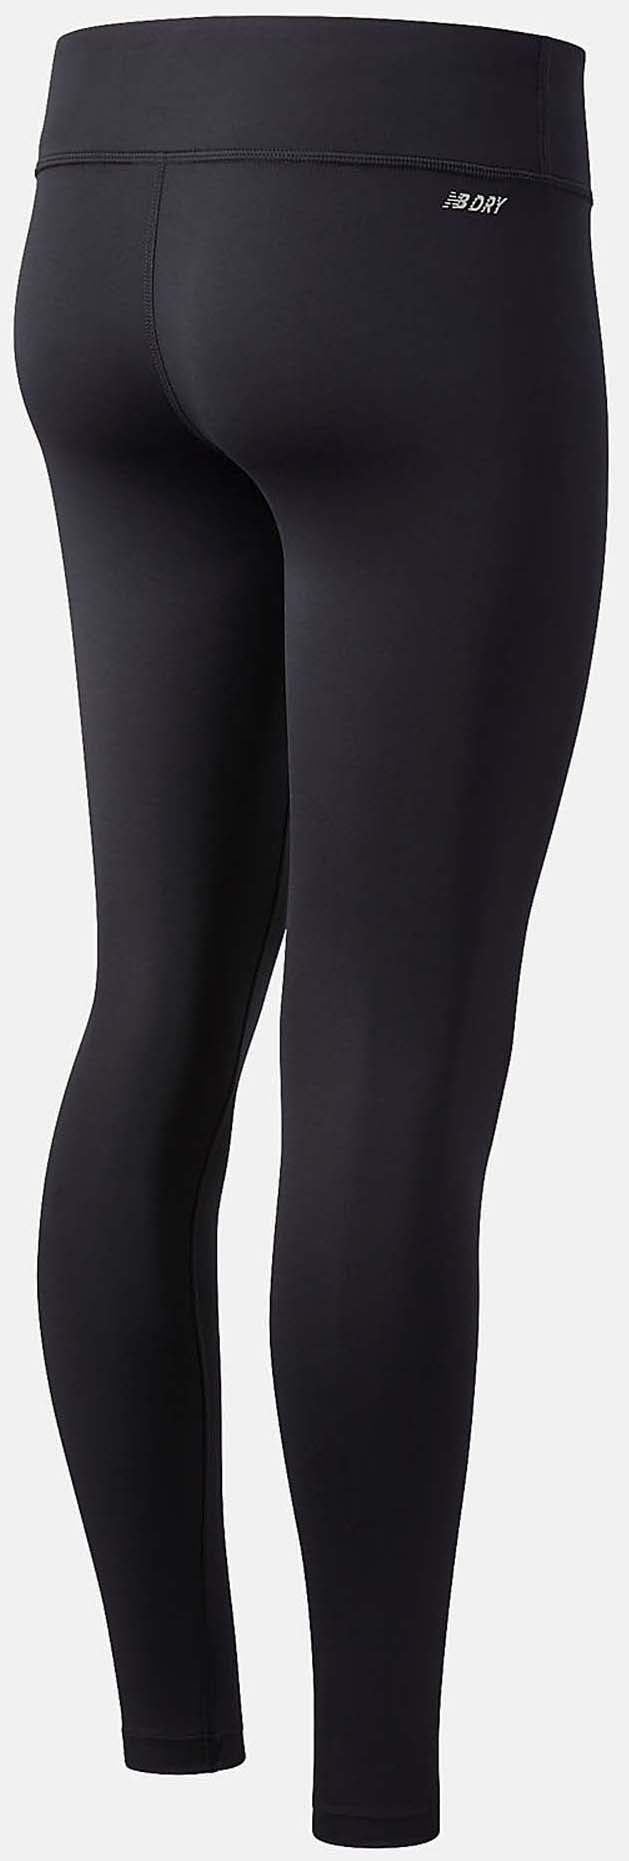 New Balance Accelerate Tights - Women's